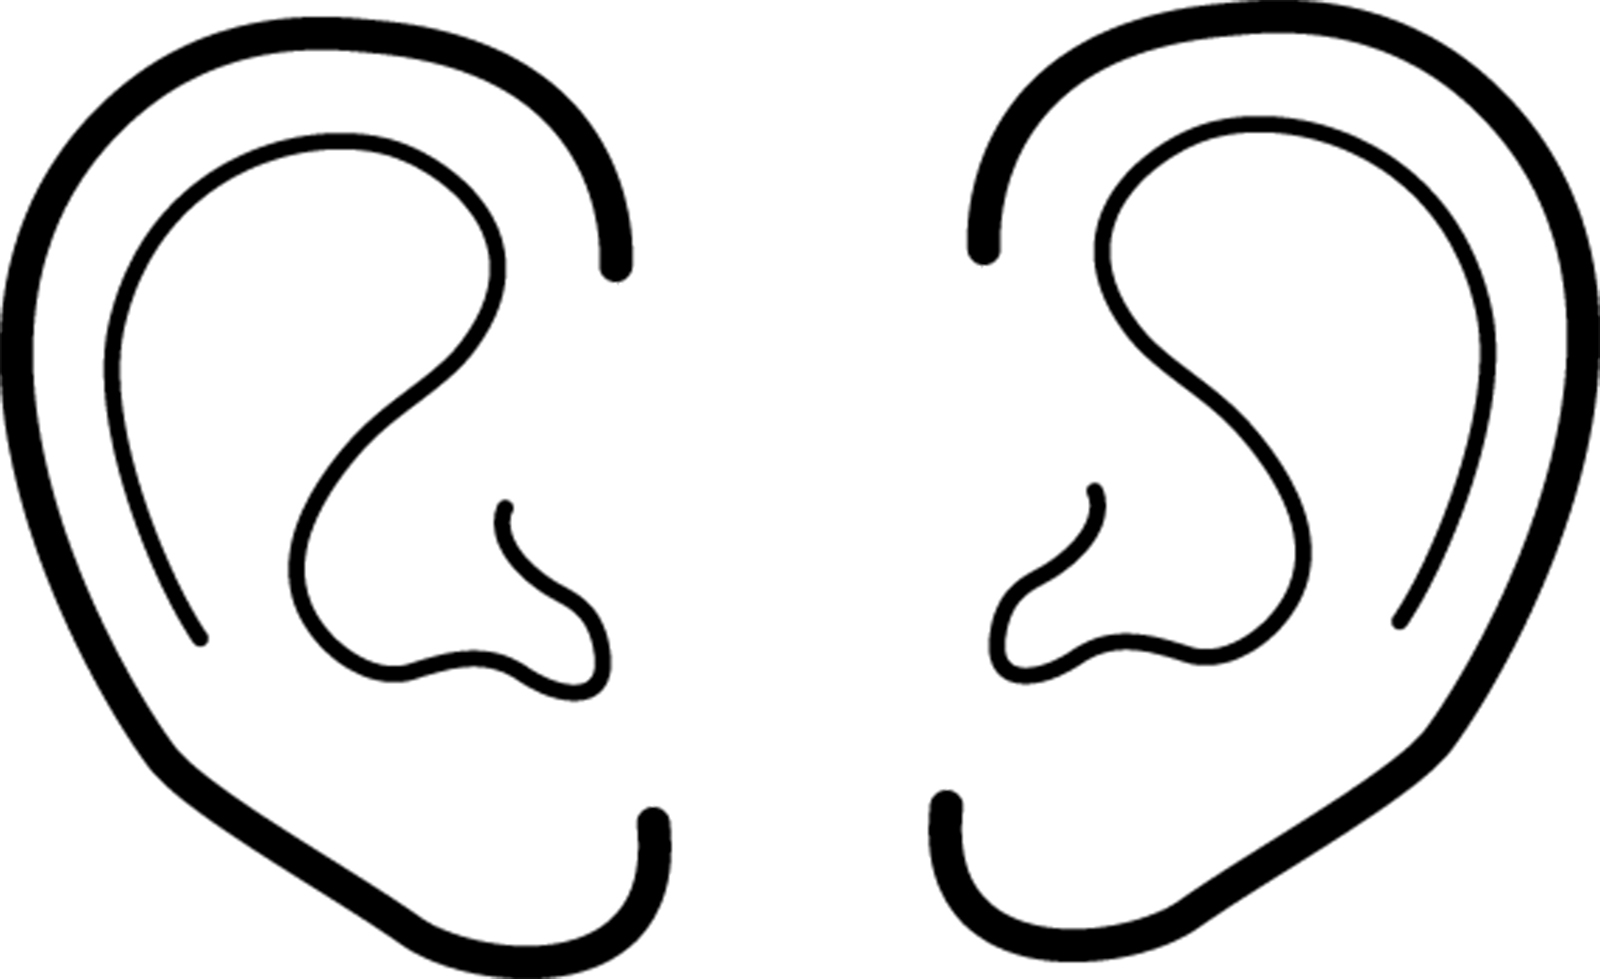 Pair of ears clipart